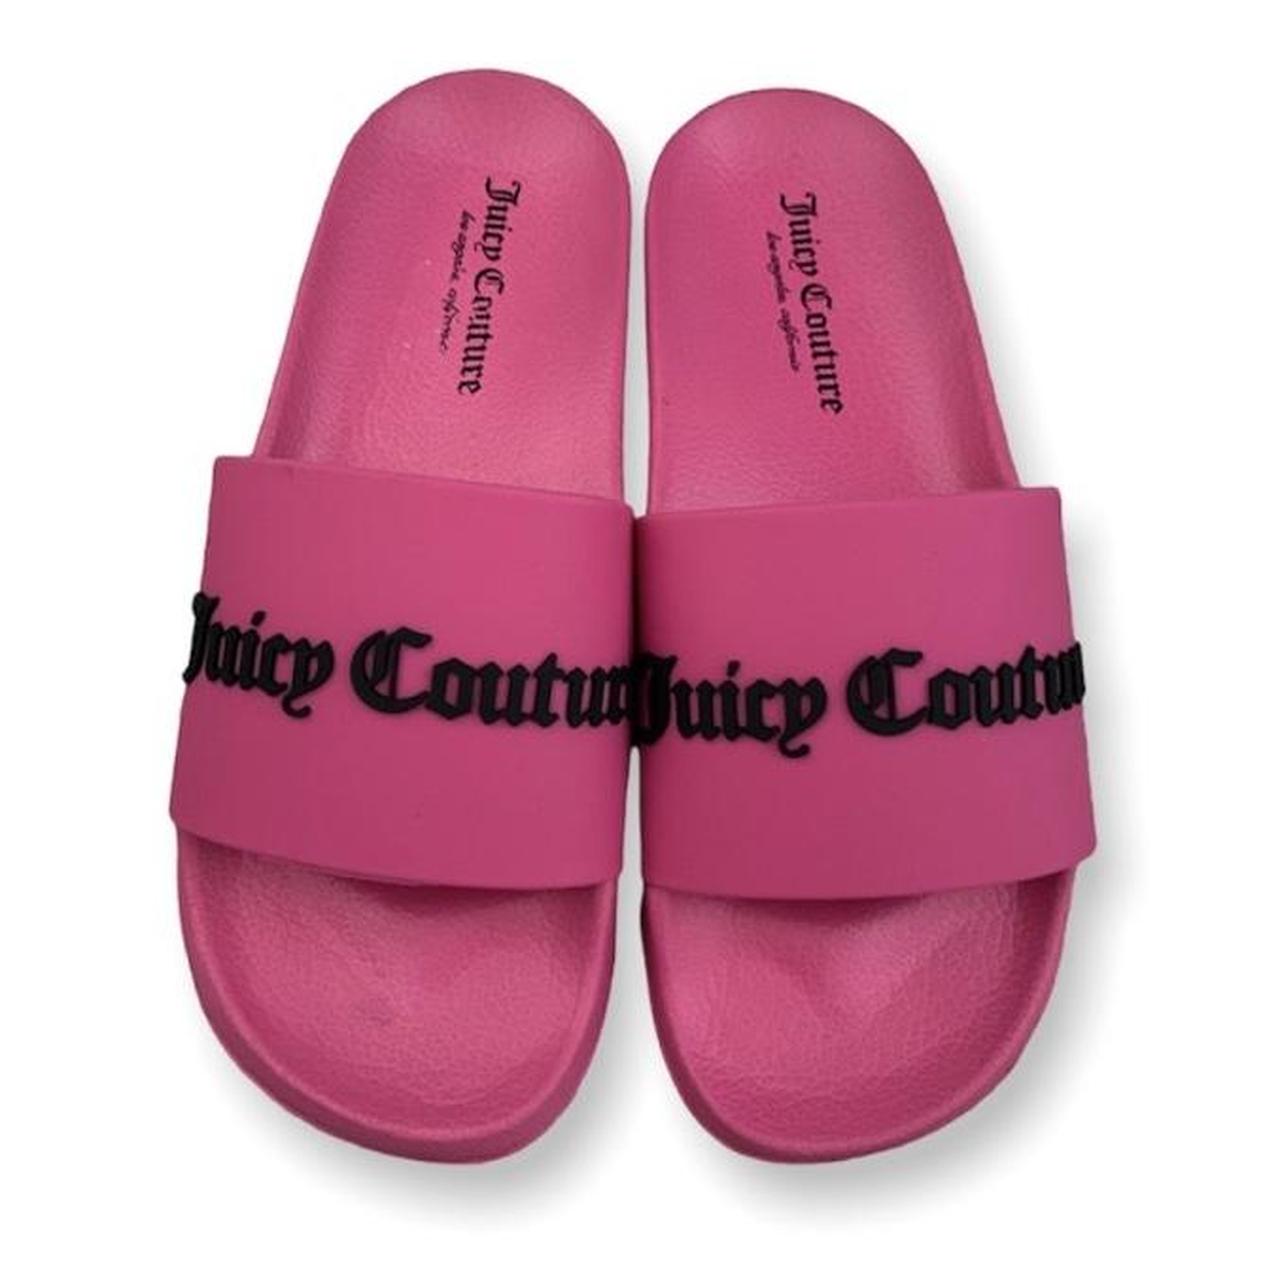 Juicy Couture Women's Black and Pink Slides | Depop